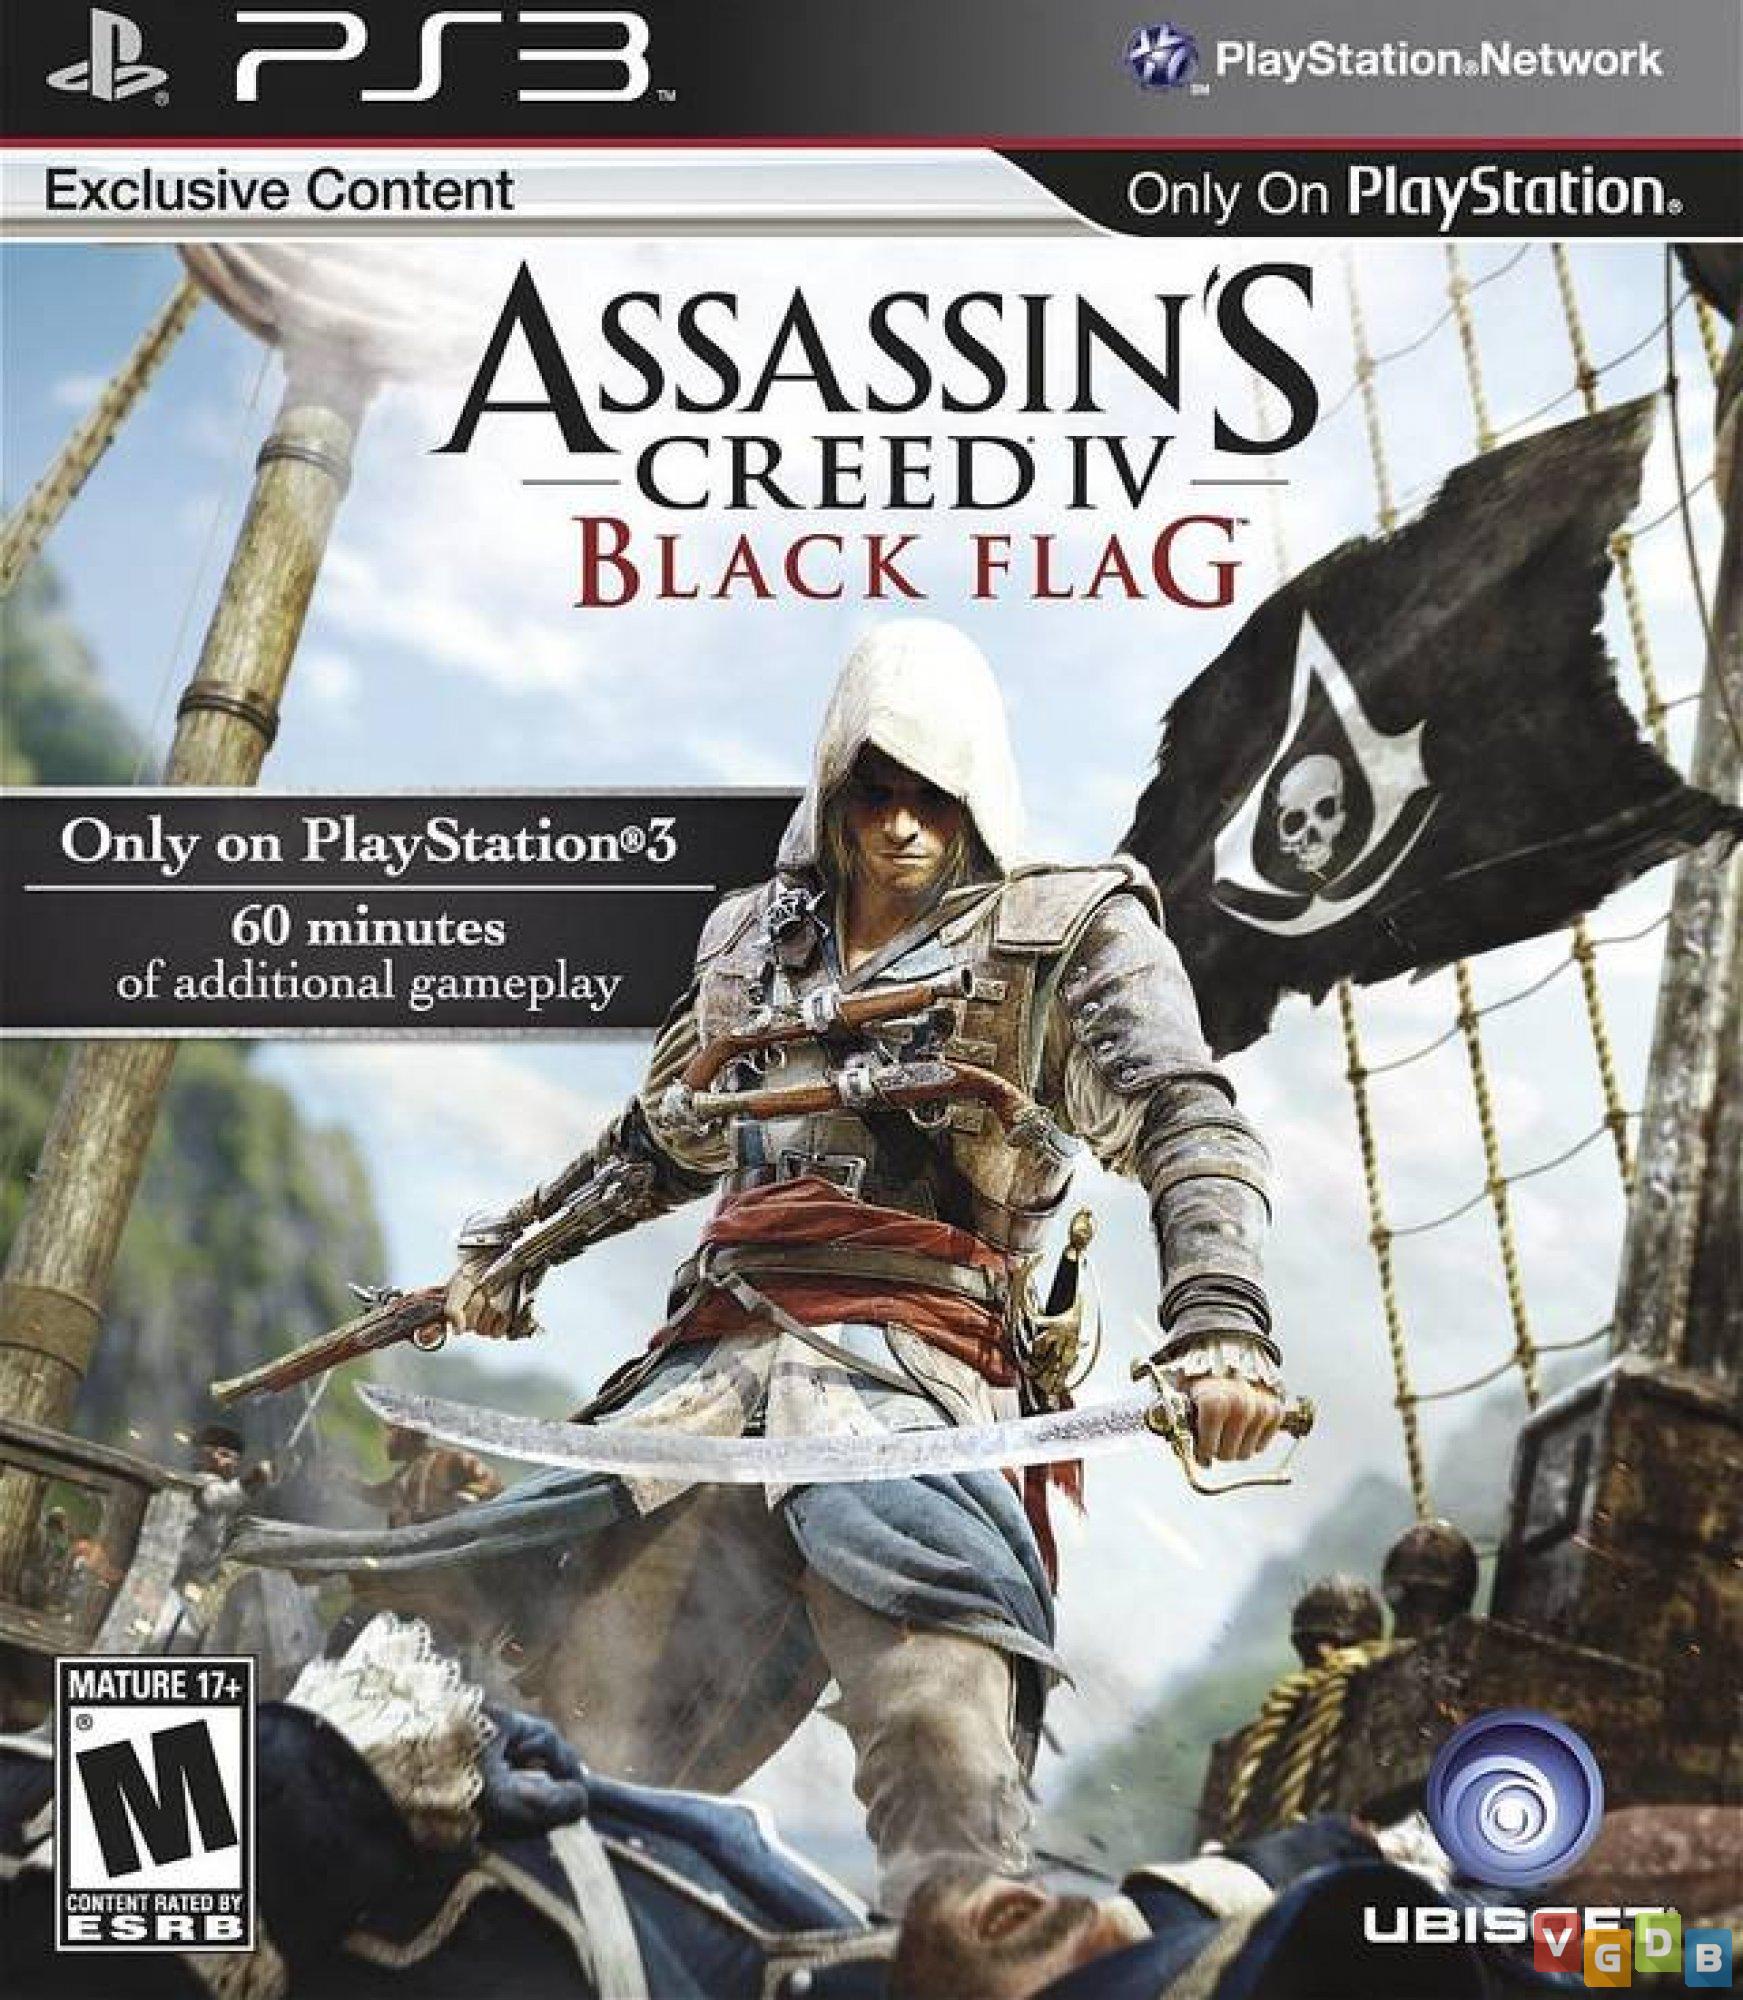 Assassin's Creed: The Americas Collection - PlayStation 3, PlayStation 3